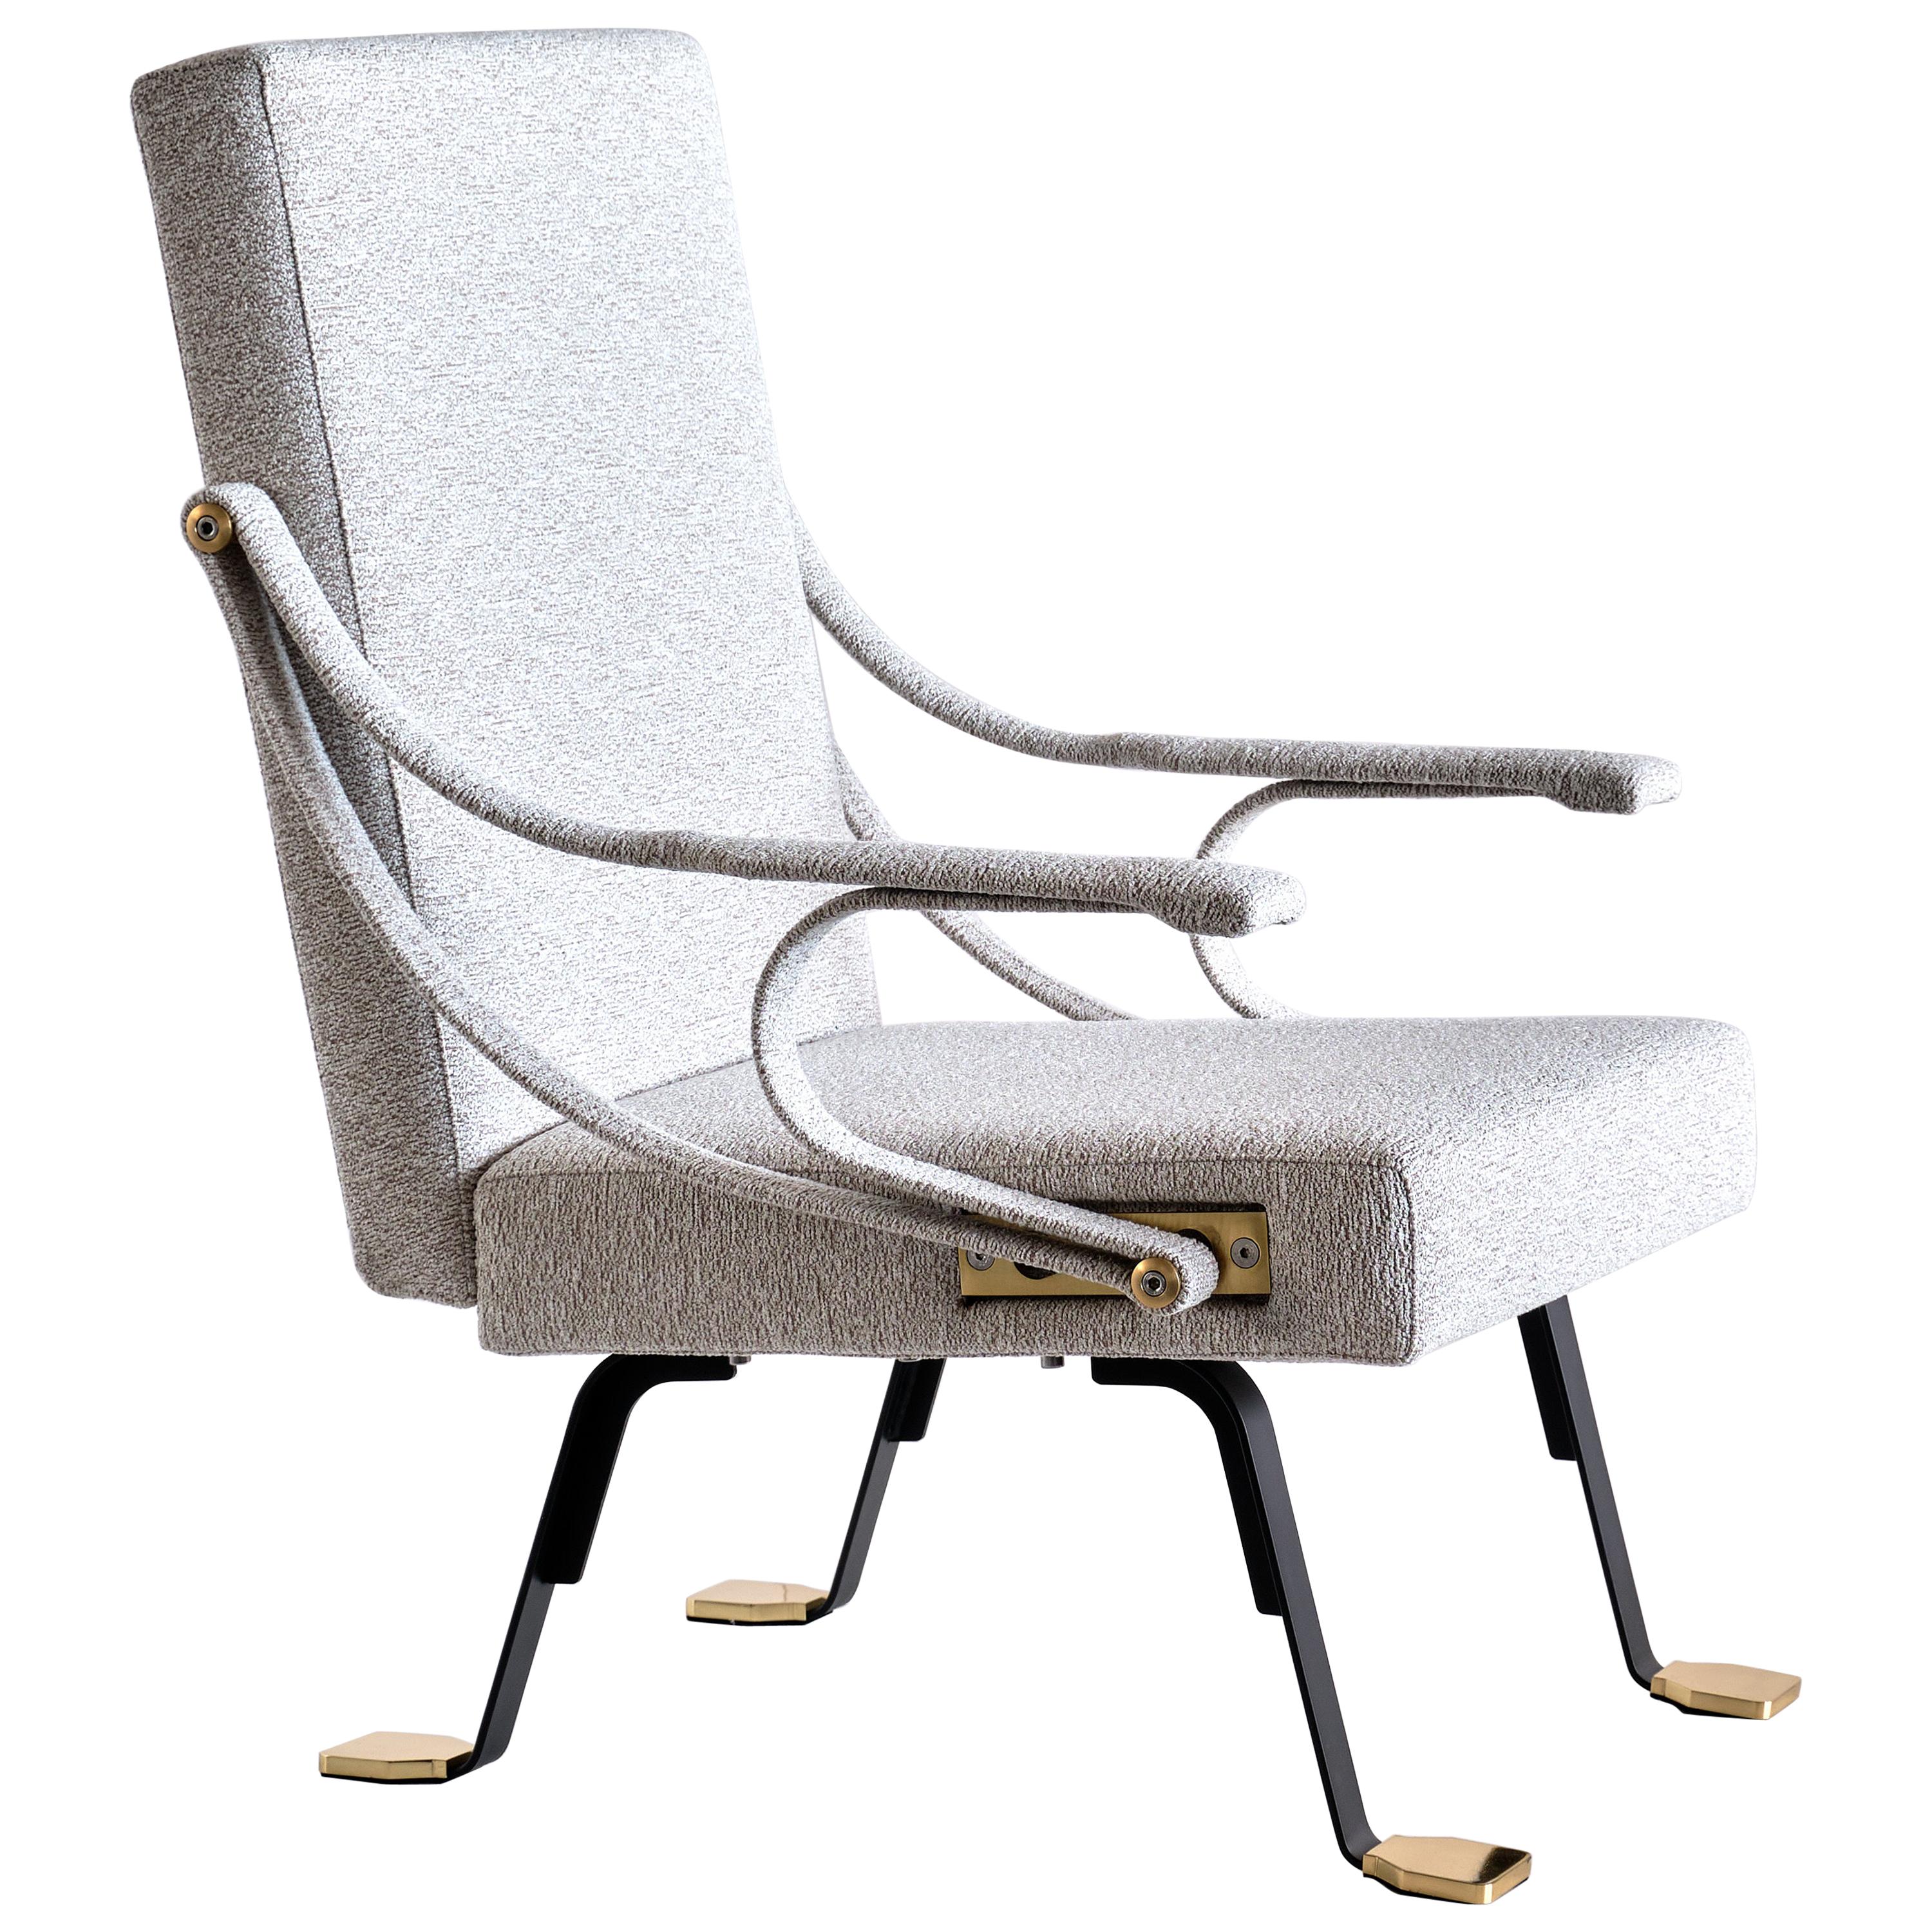 Ignazio Gardella 'Digamma' Armchair in Ivory Lelièvre Bouclé Fabric and Brass